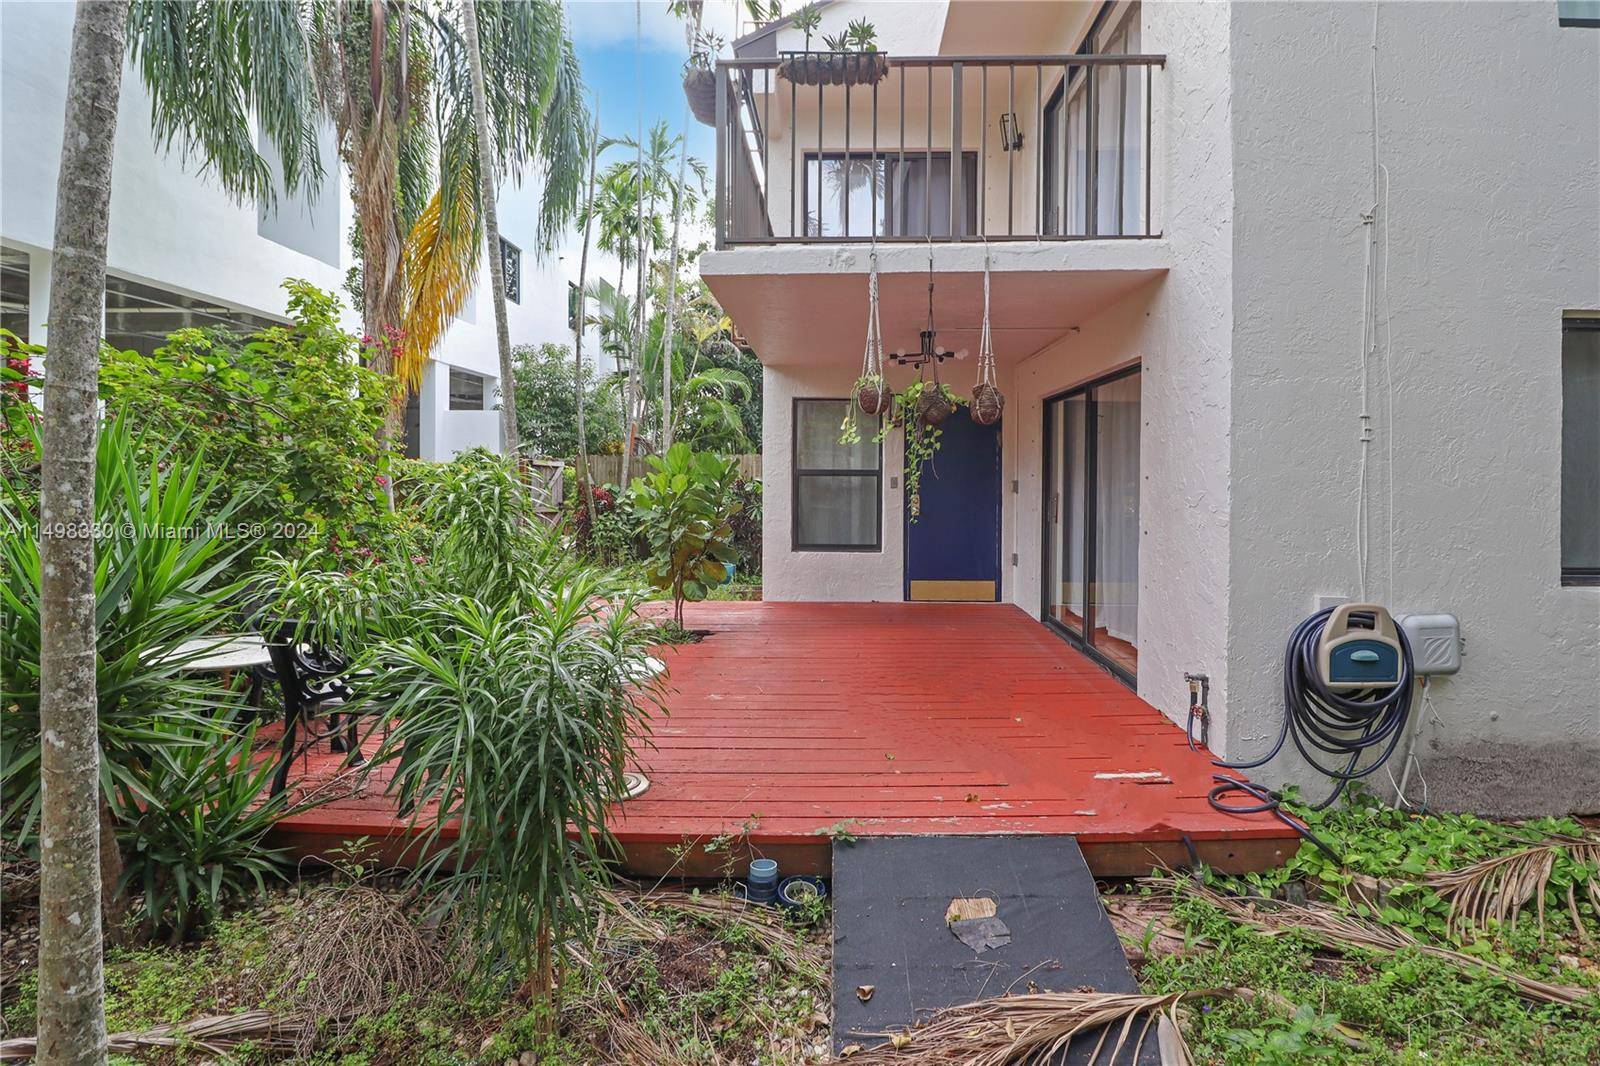 Ensure you seize the opportunity to lease this expansive two bedroom, 1.